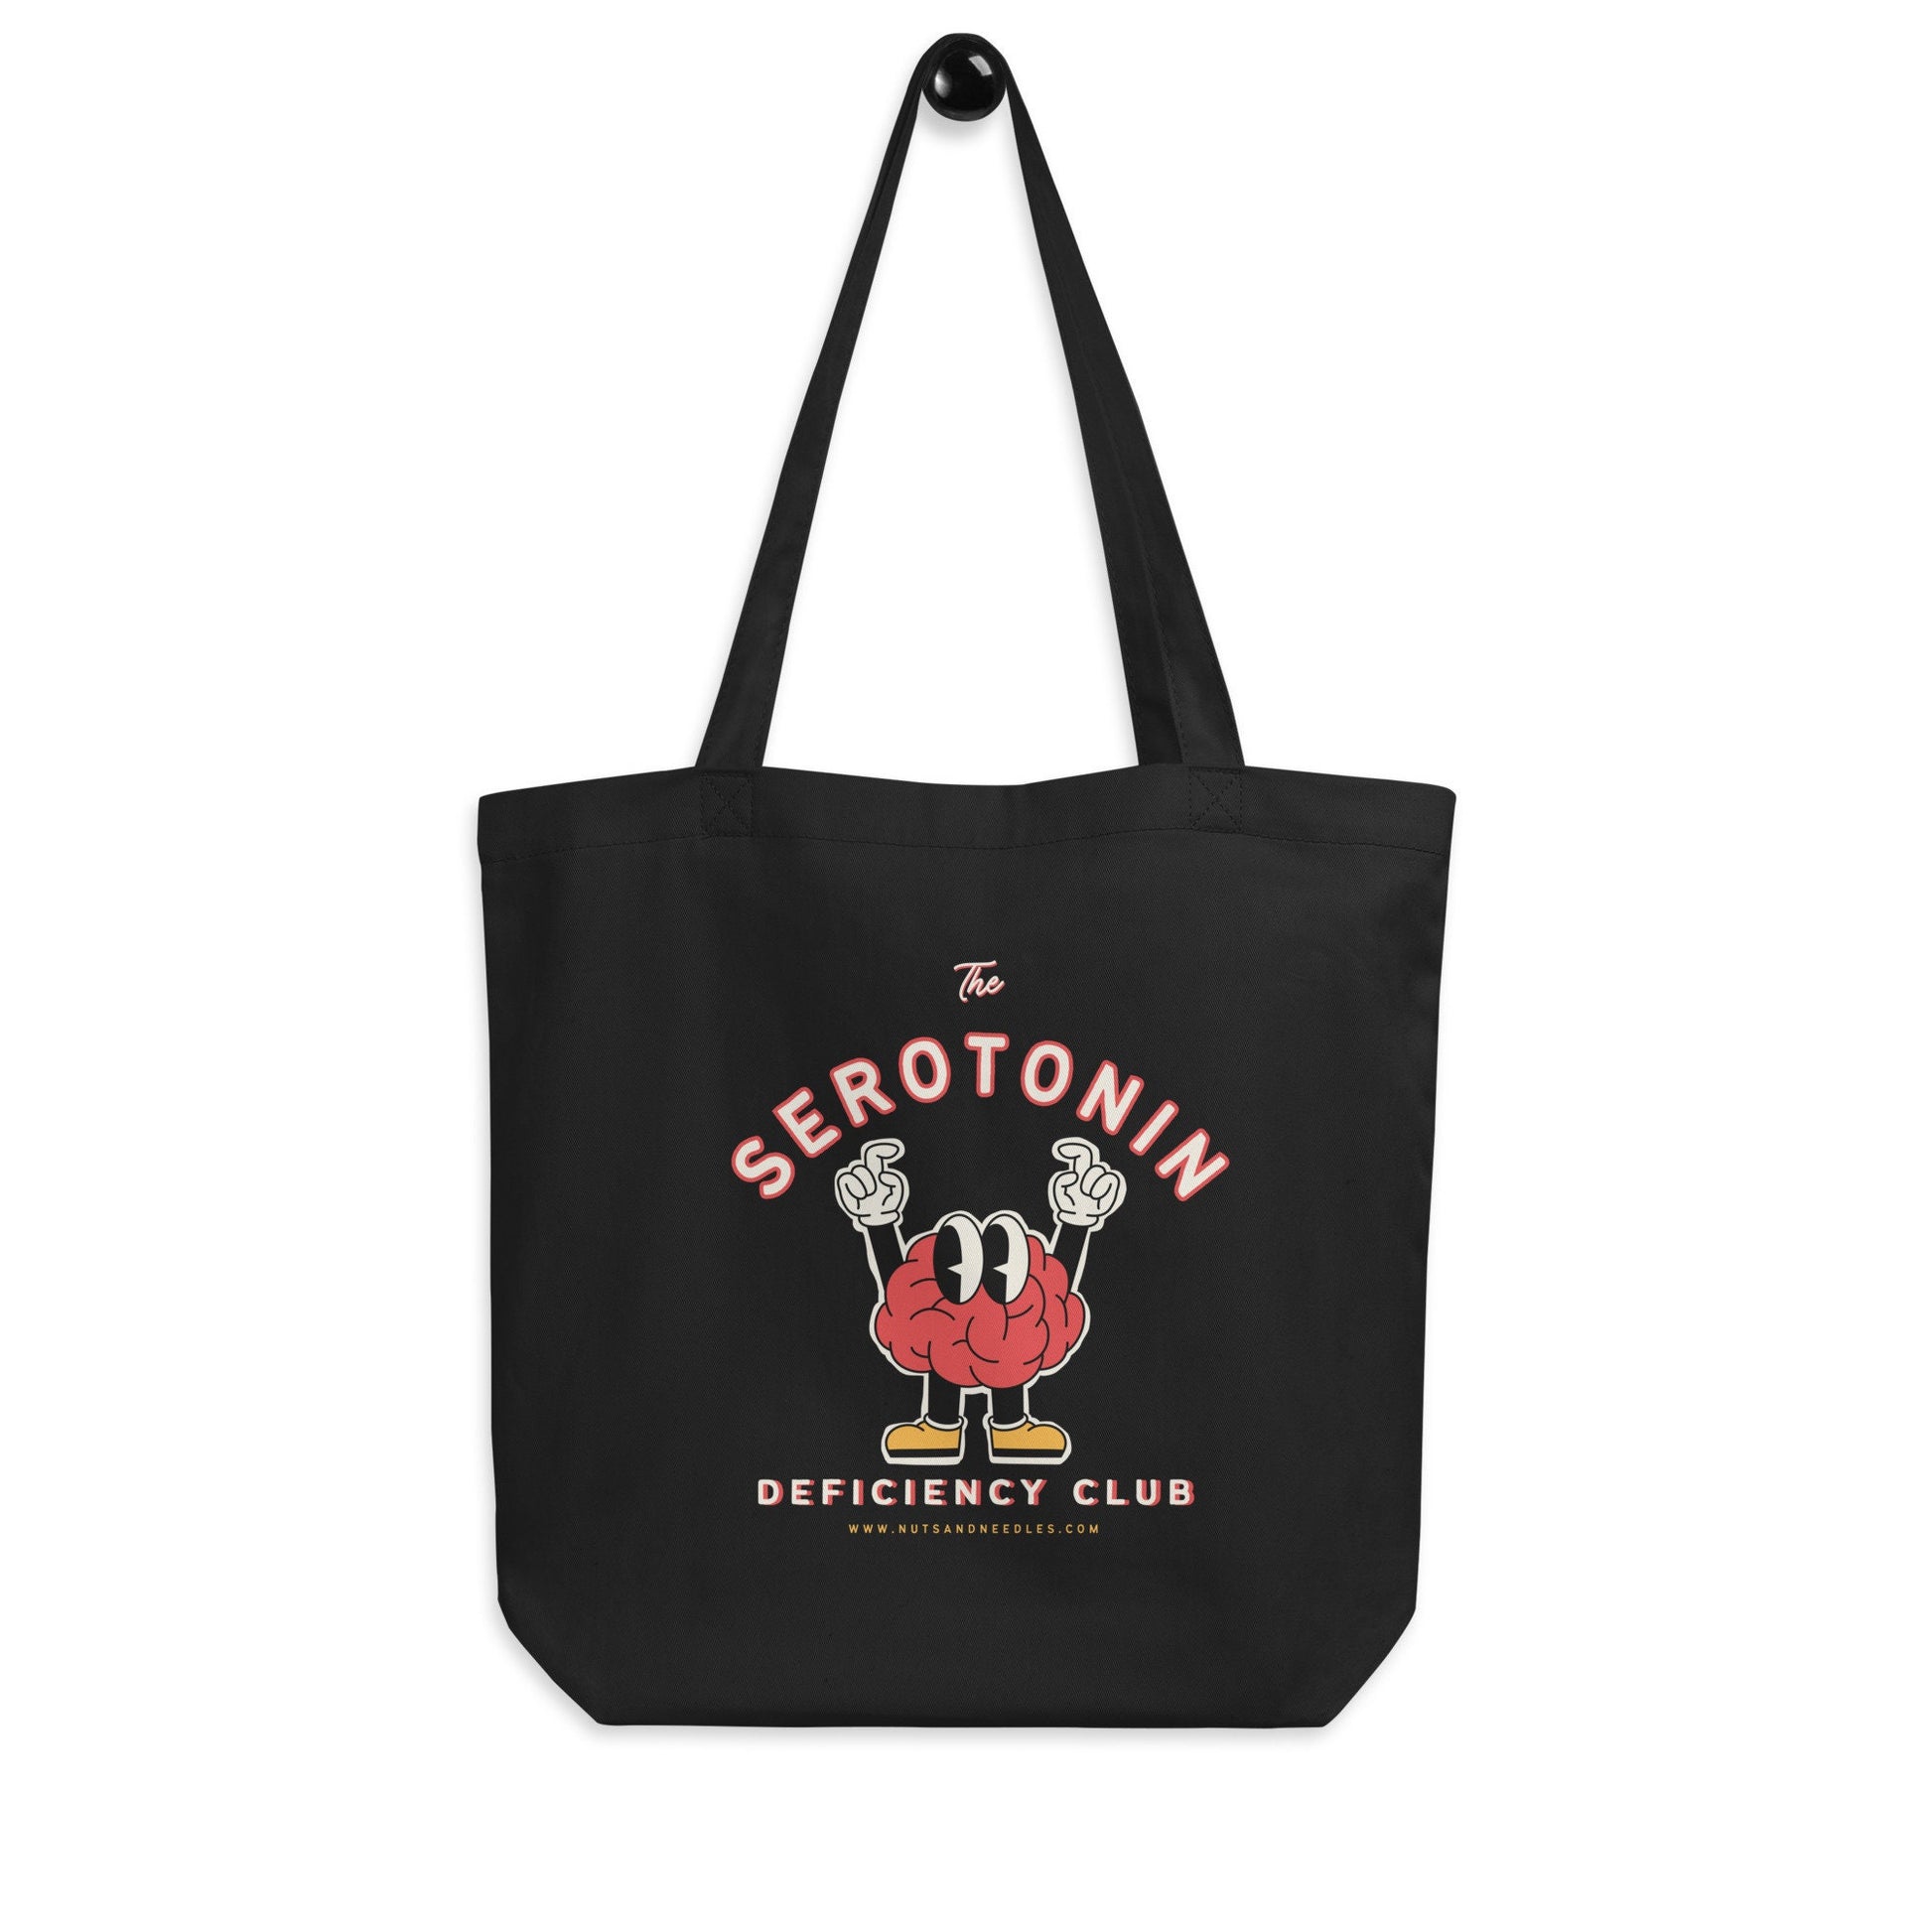 Mental Health Tote Bag &#39;Serotonin Deficiency Club&#39;, part of profit donated to Mental Health Charity, Self Care, Depression, Anxiety, Bag